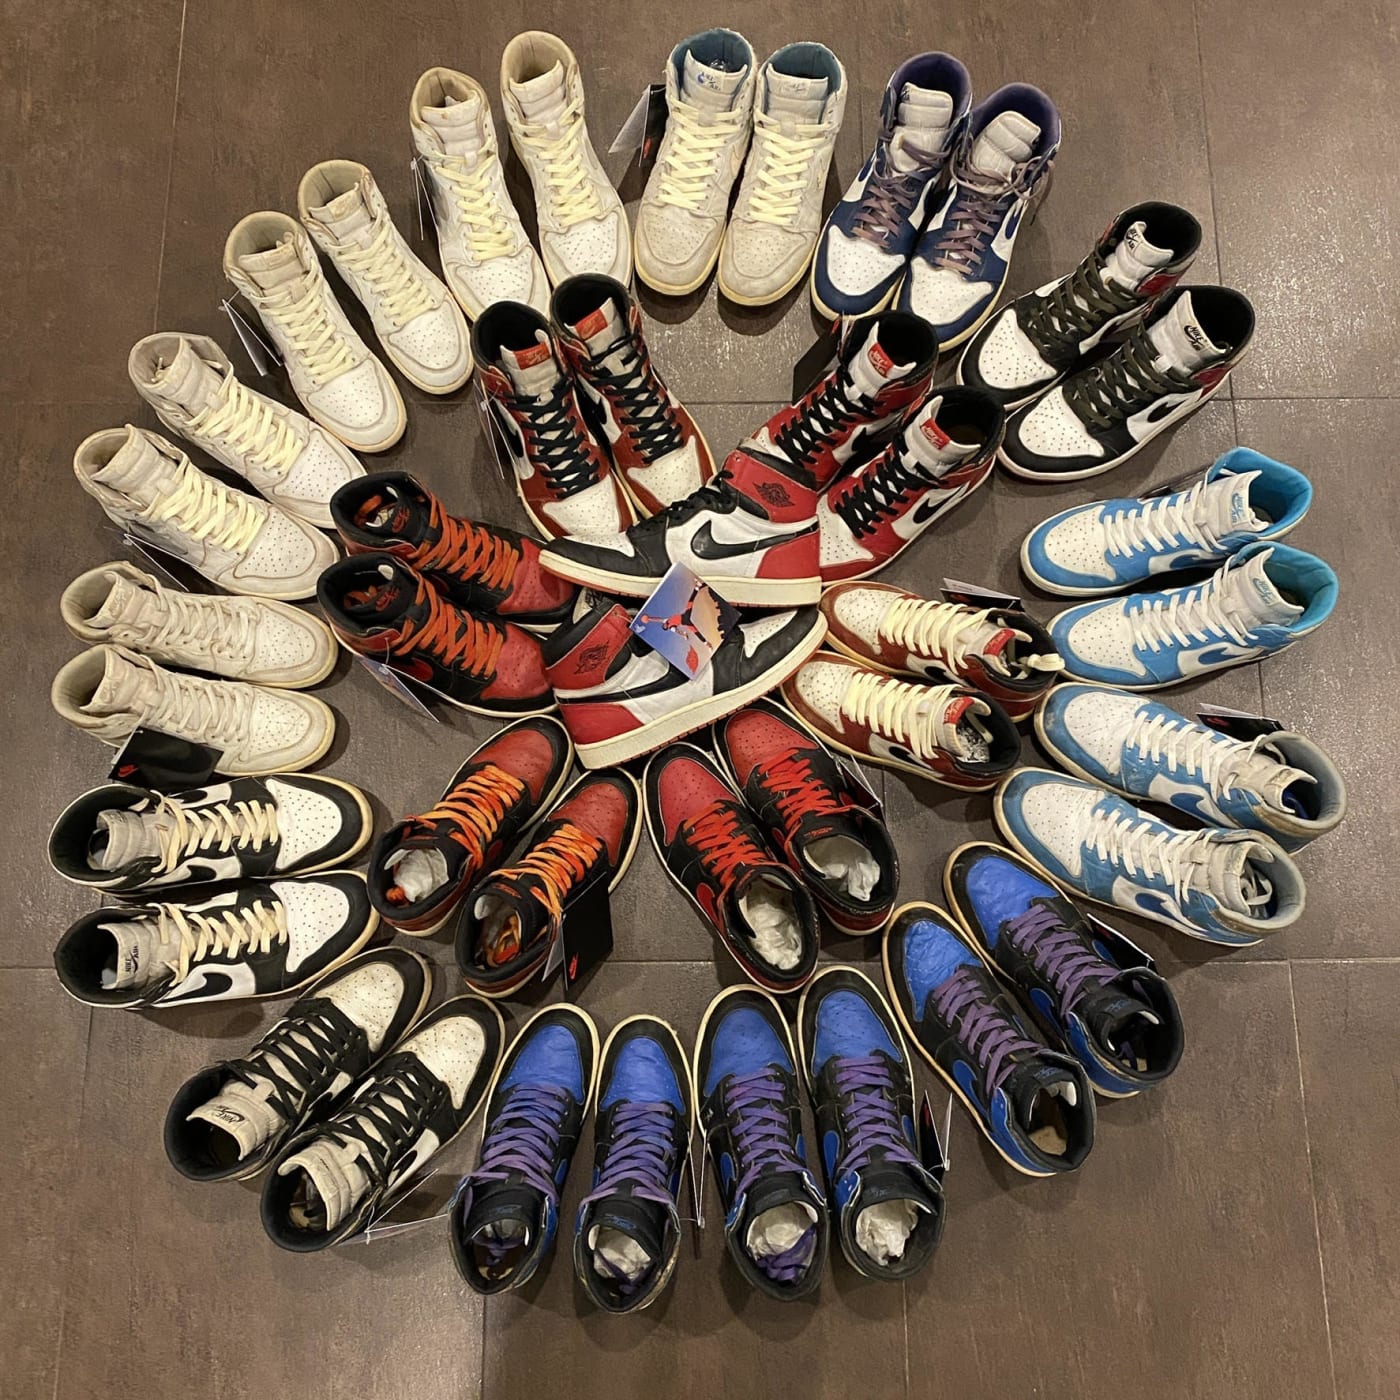 Overview shot of Tye Engmann's sneaker collection